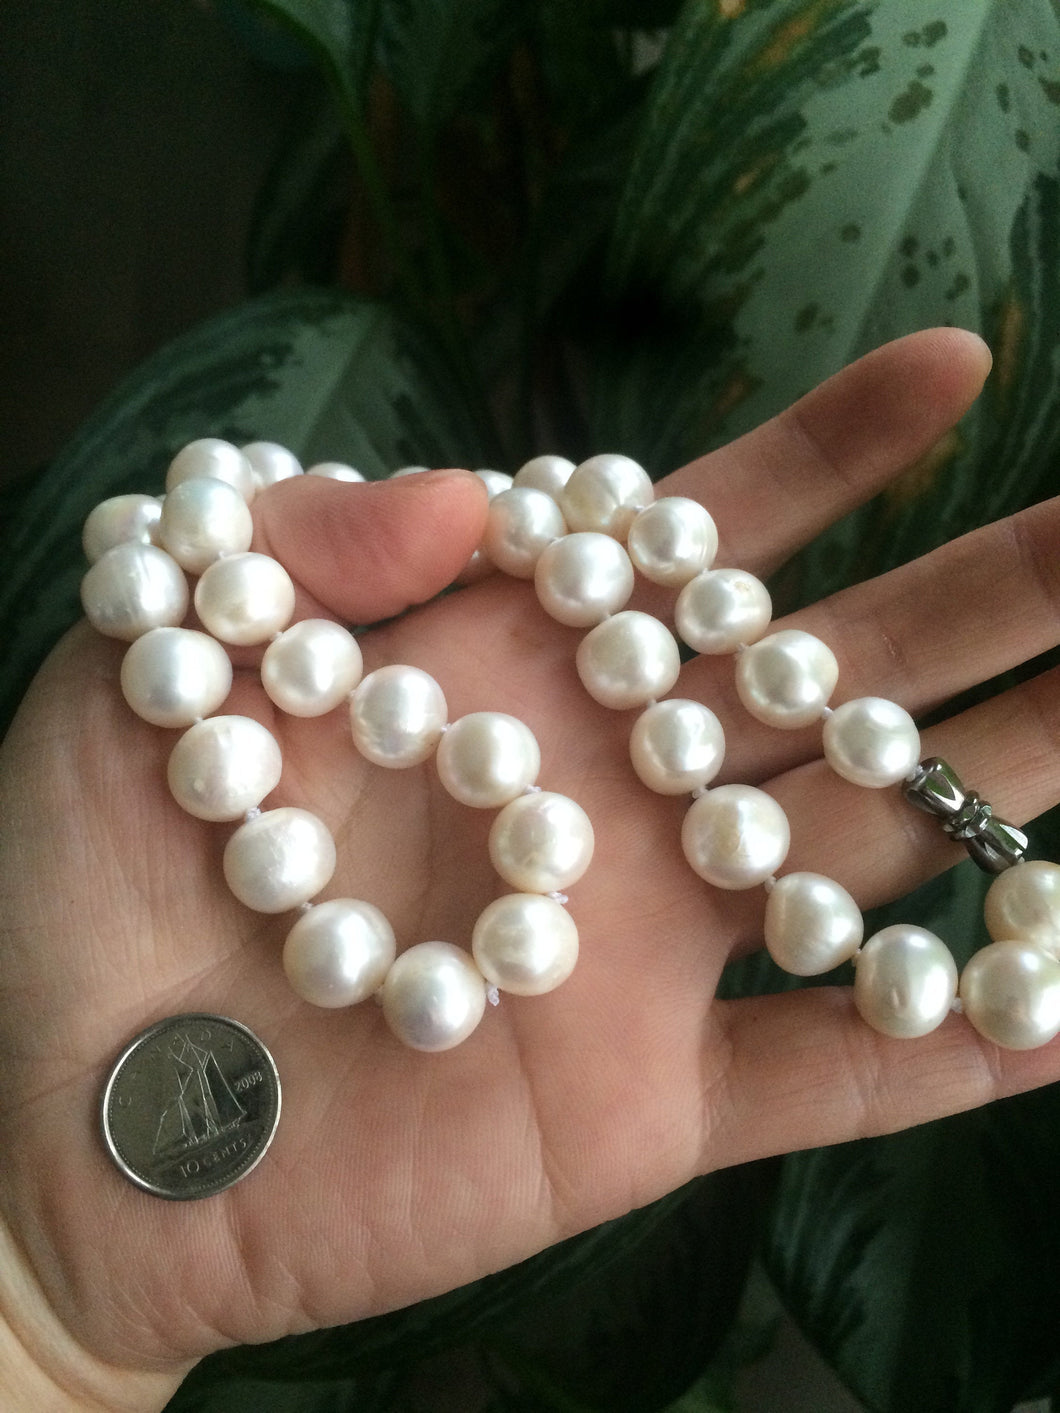 Genuine cultured 10.7-11.6mm freshwater high luster reflective white pearl necklace RP-8